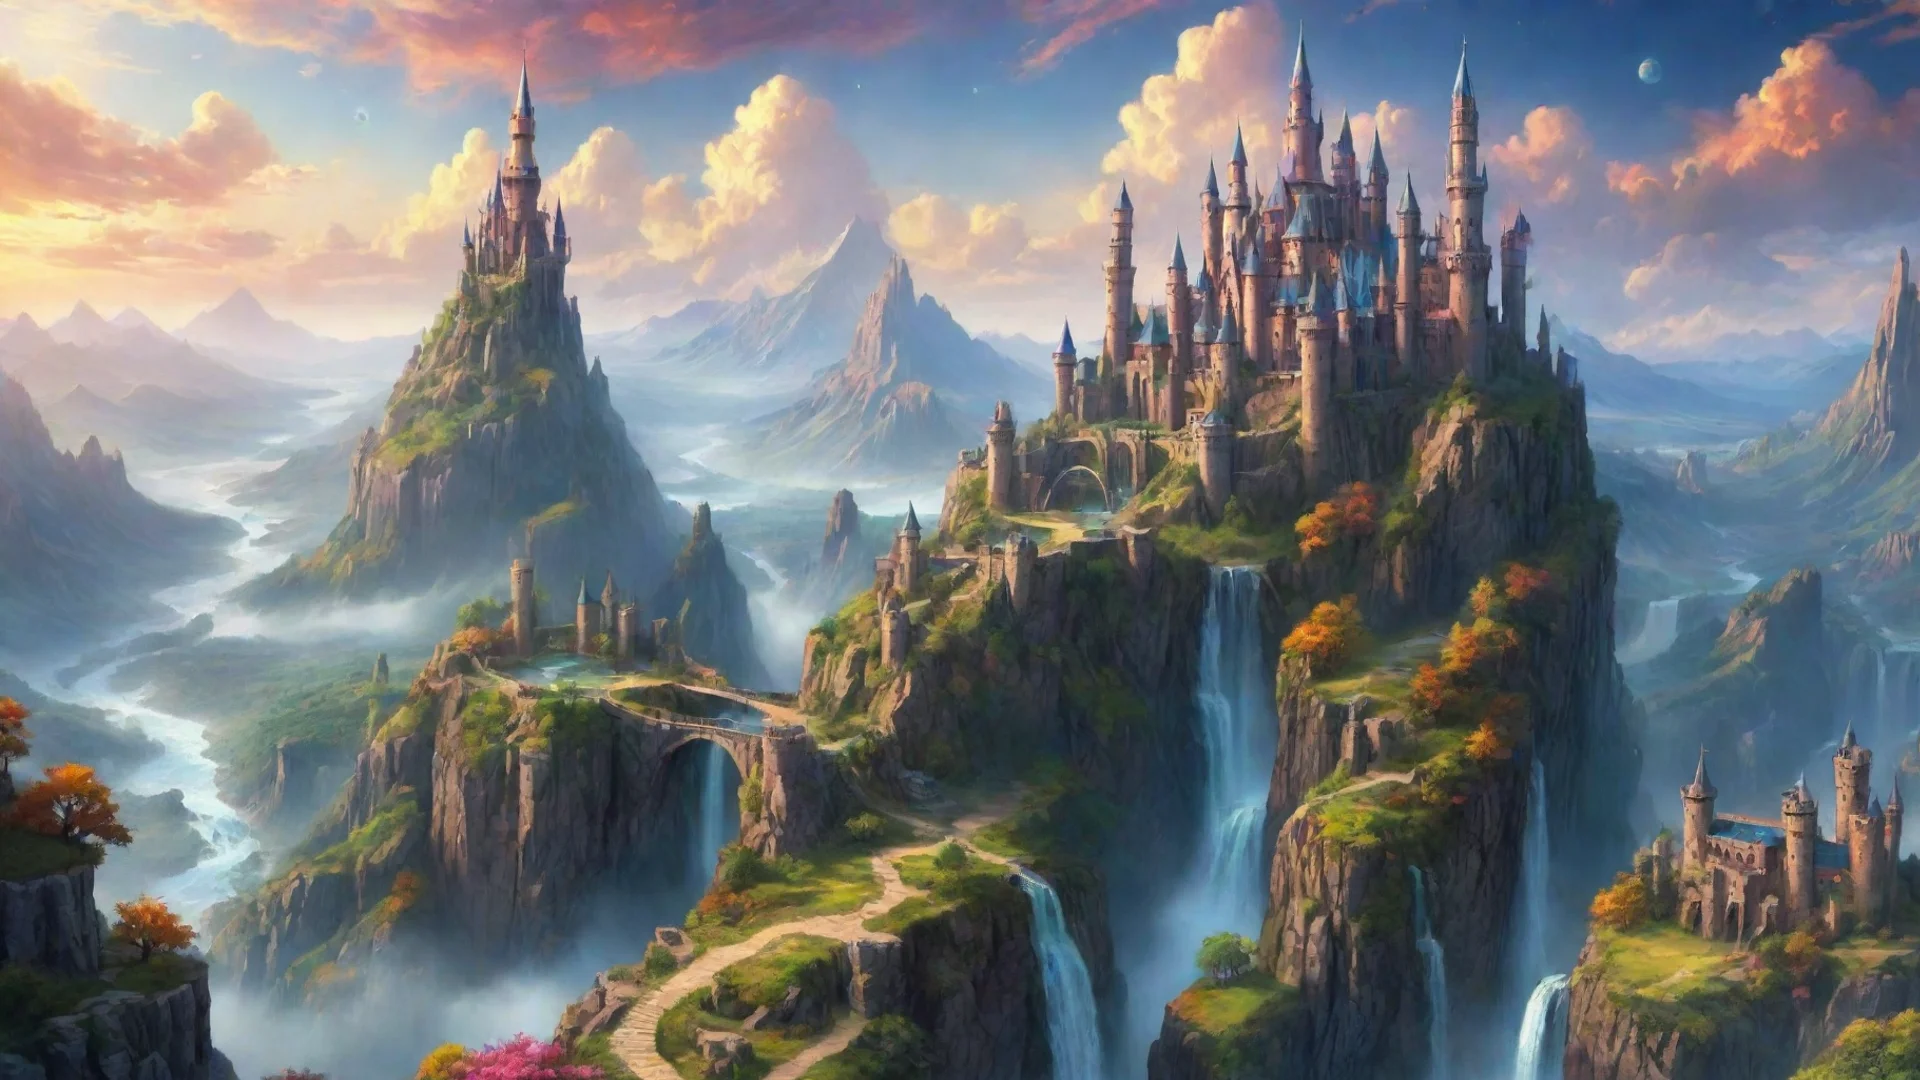 aiamazing amazing scenery hd detailed colorful planets in sky realistic castles spiral towers high cliffs waterfalls beautiful wonderful aesthetic awesome portrait 2 wide